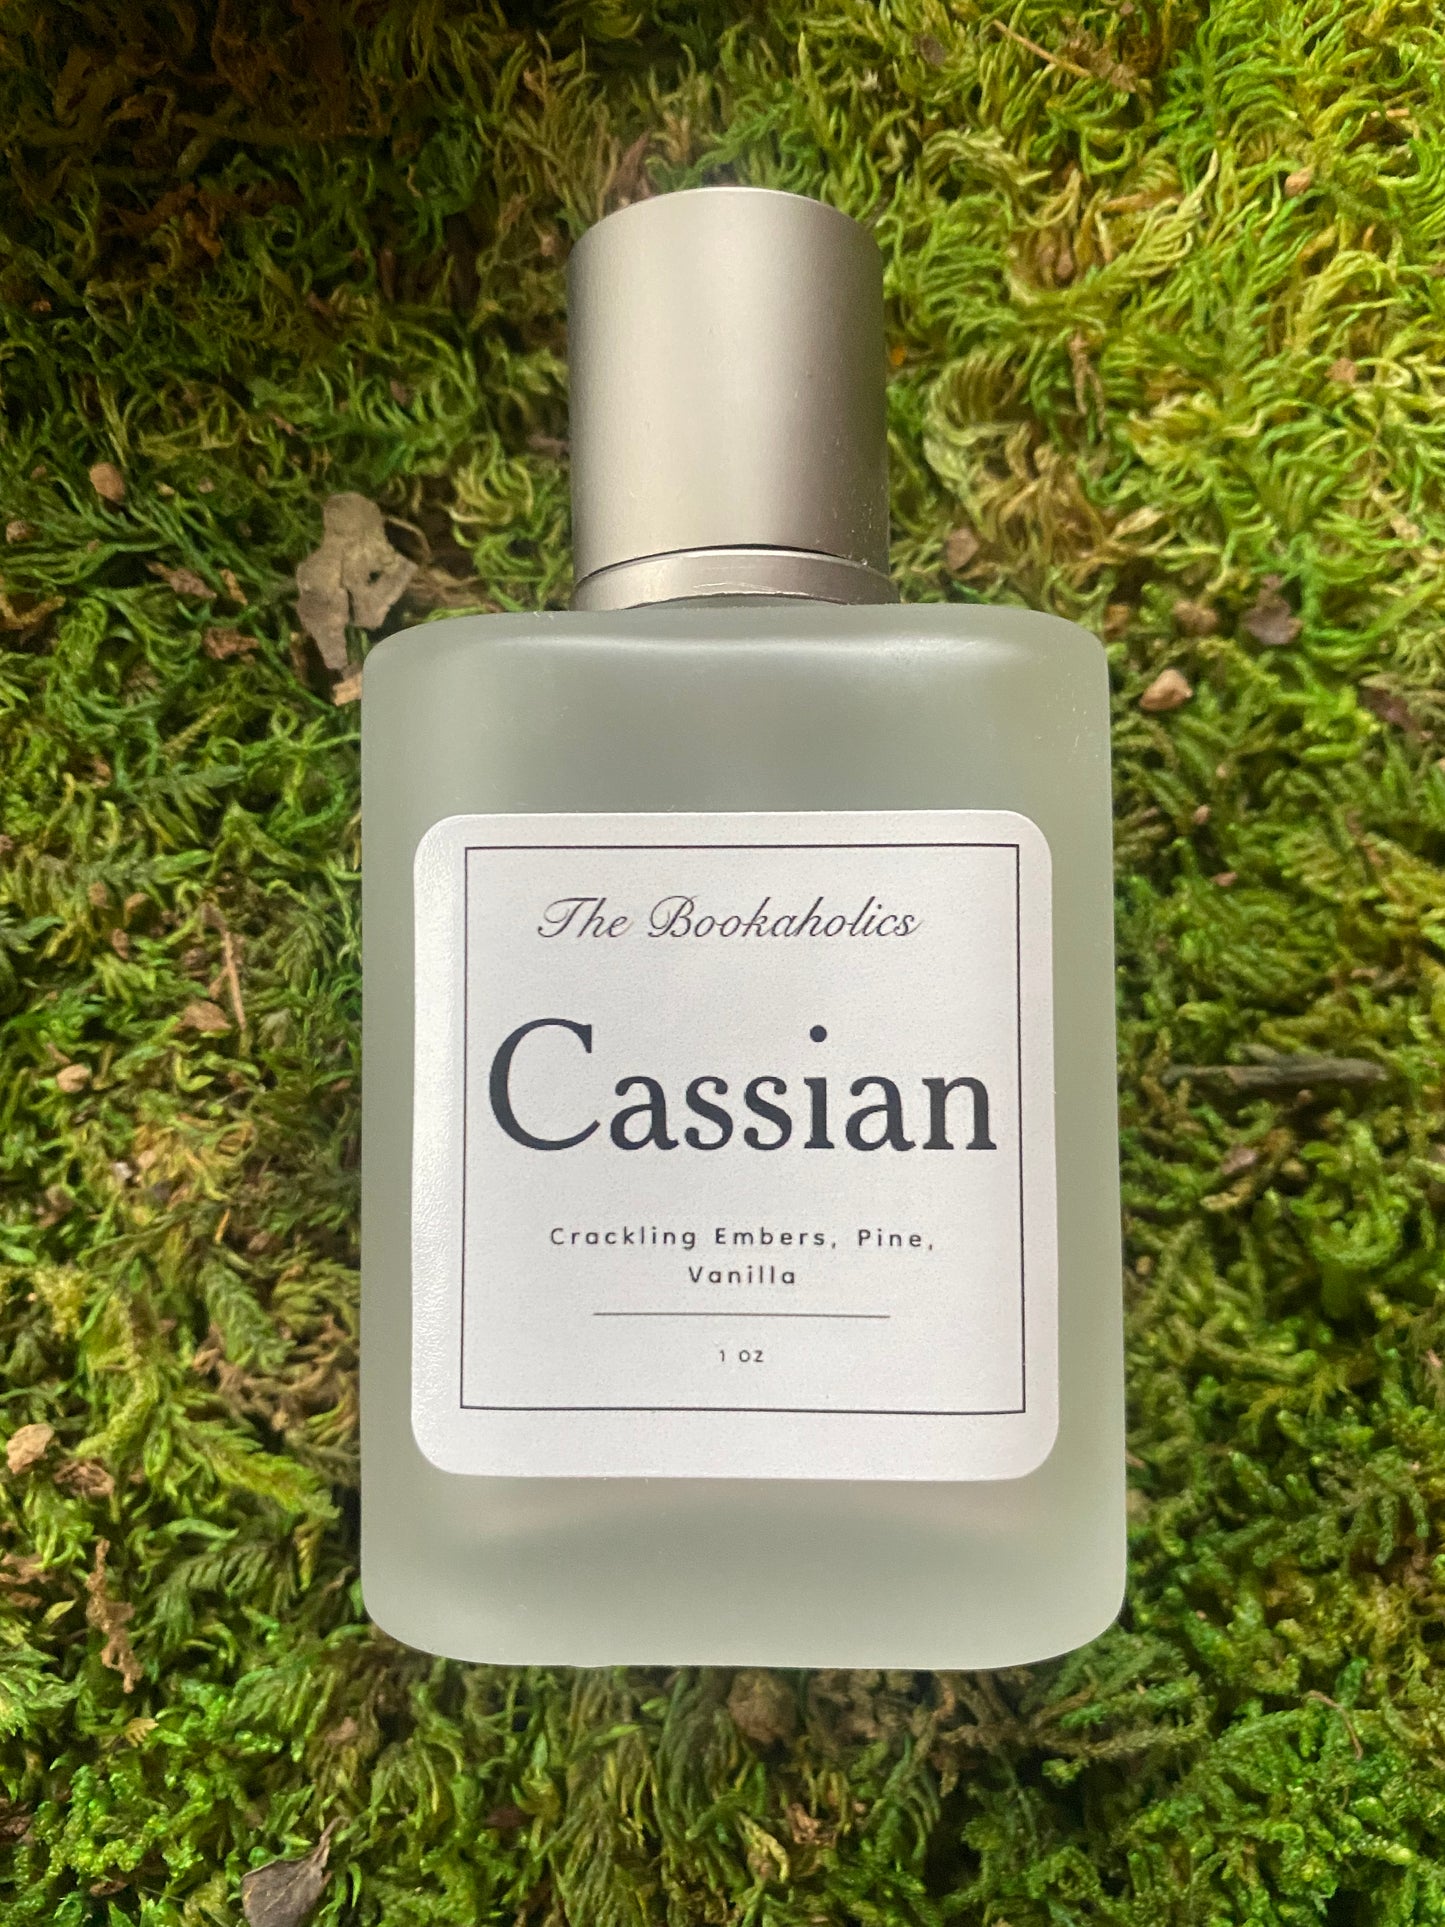 Cassian: Cologne inspired by Cassian from A Court of Thorns and Roses